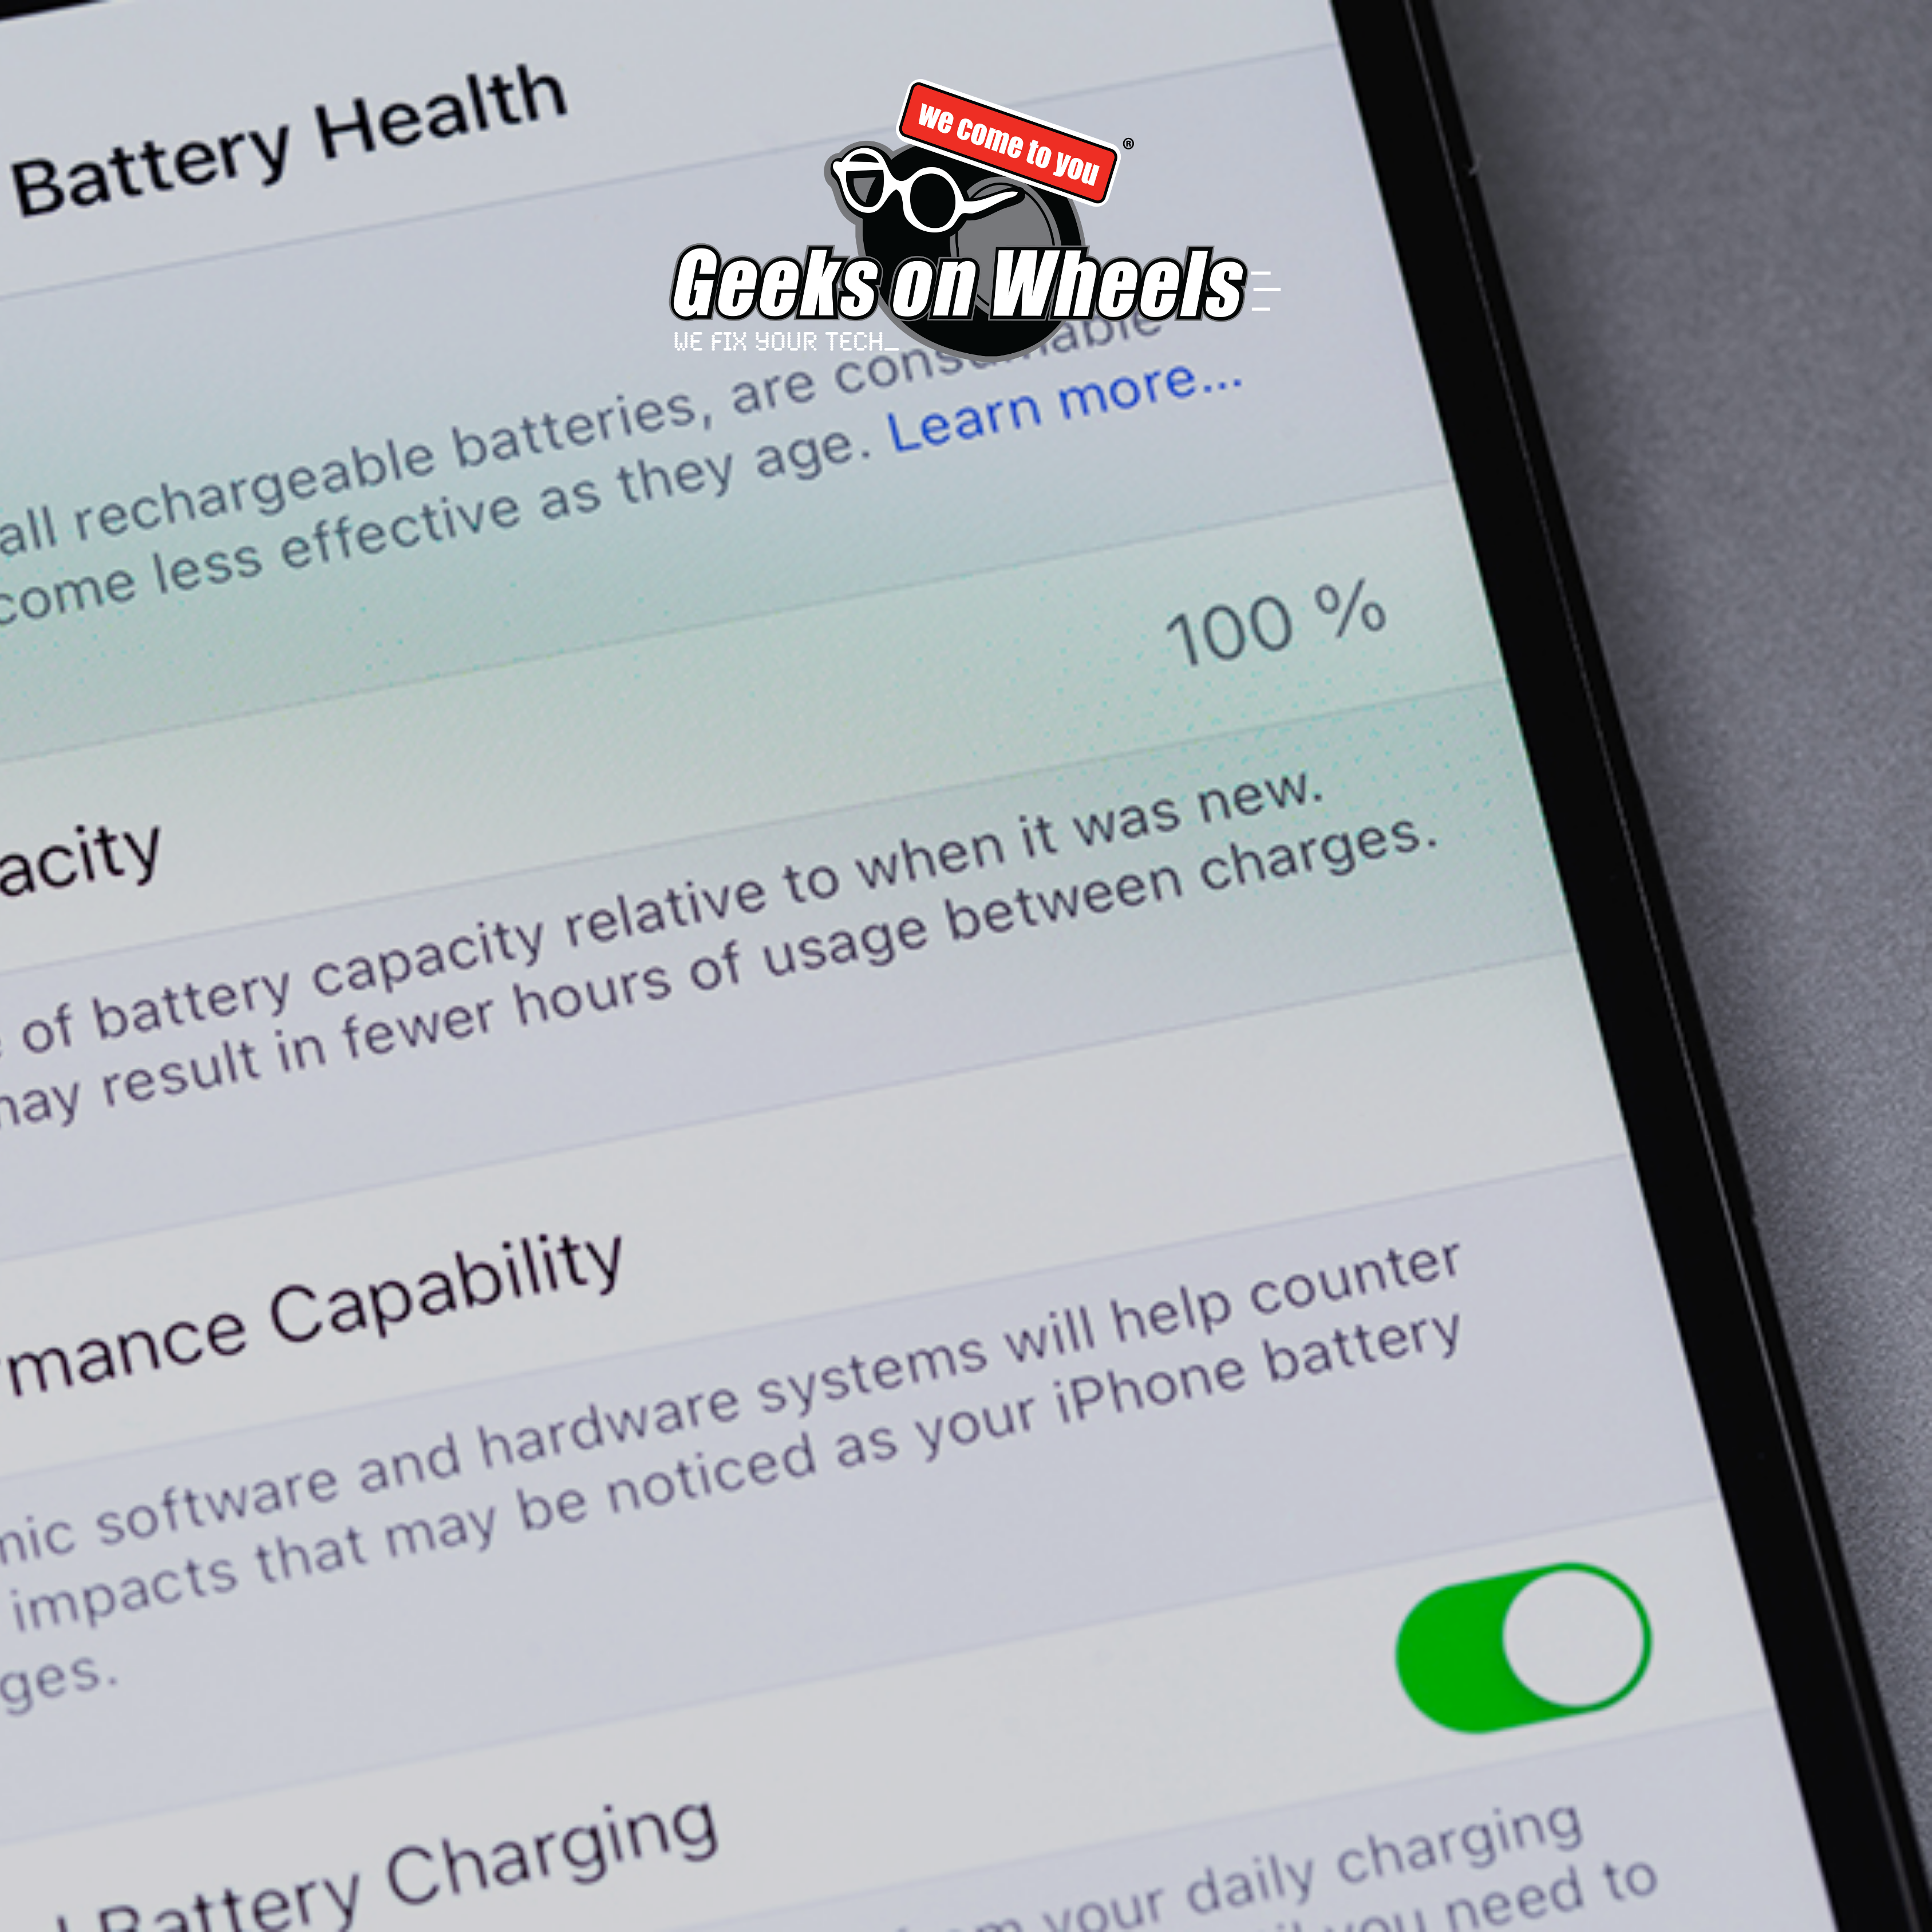 Extend the life of your smartphone’s battery